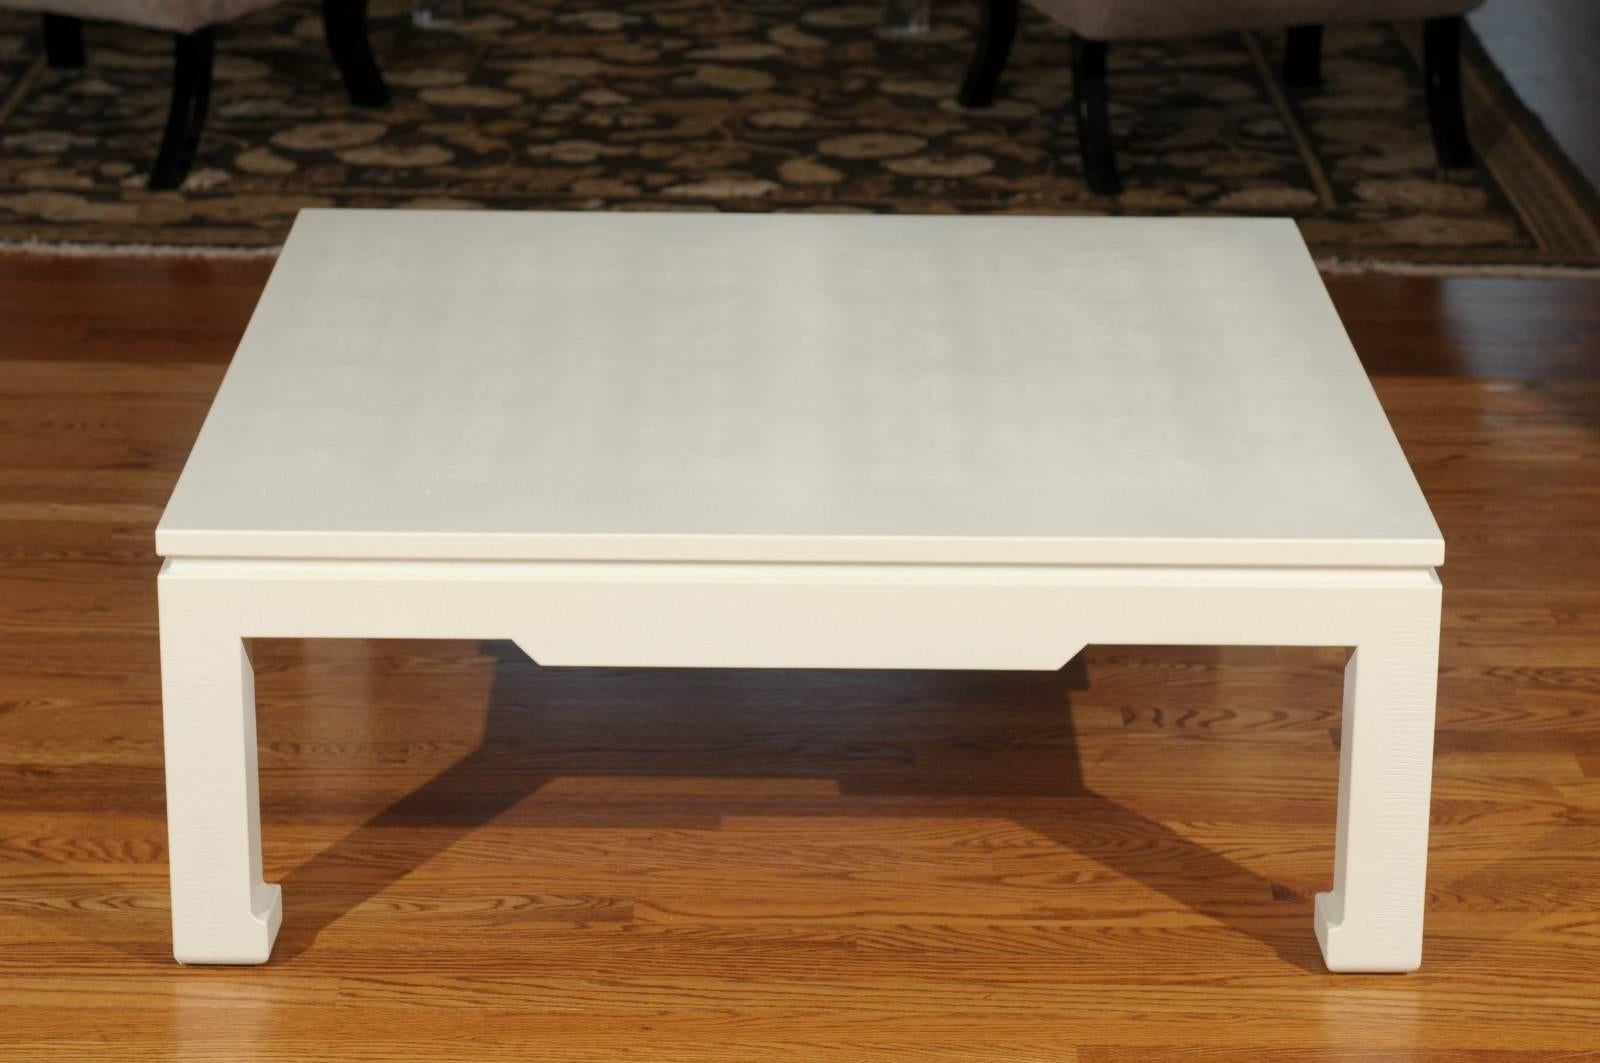 Unknown Exquisite Restored Snakeskin Coffee Table in Cream Lacquer, circa 1975 For Sale